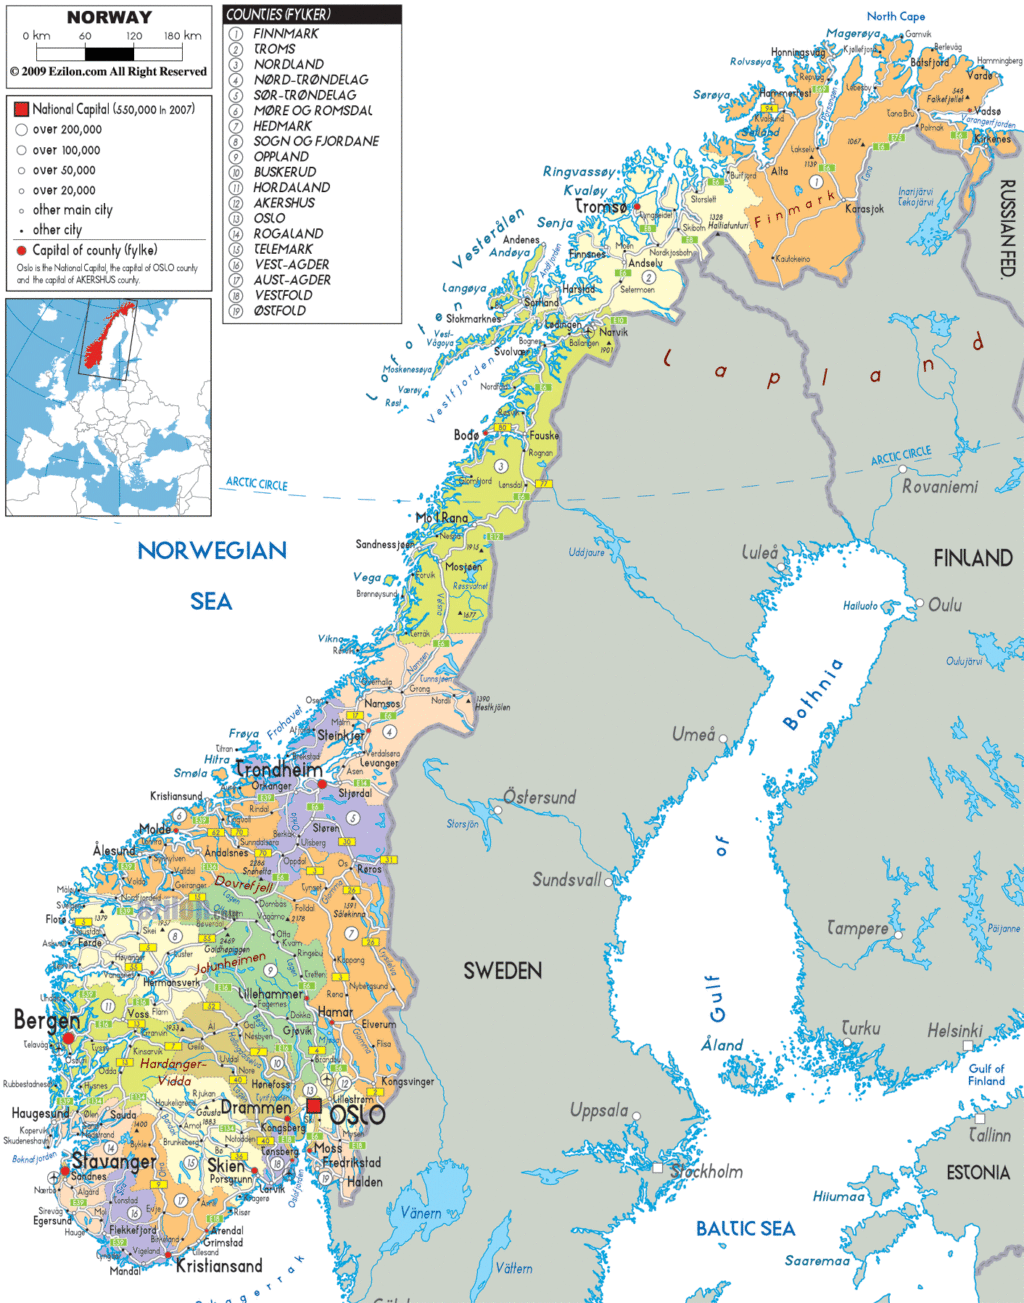 Norway political map.